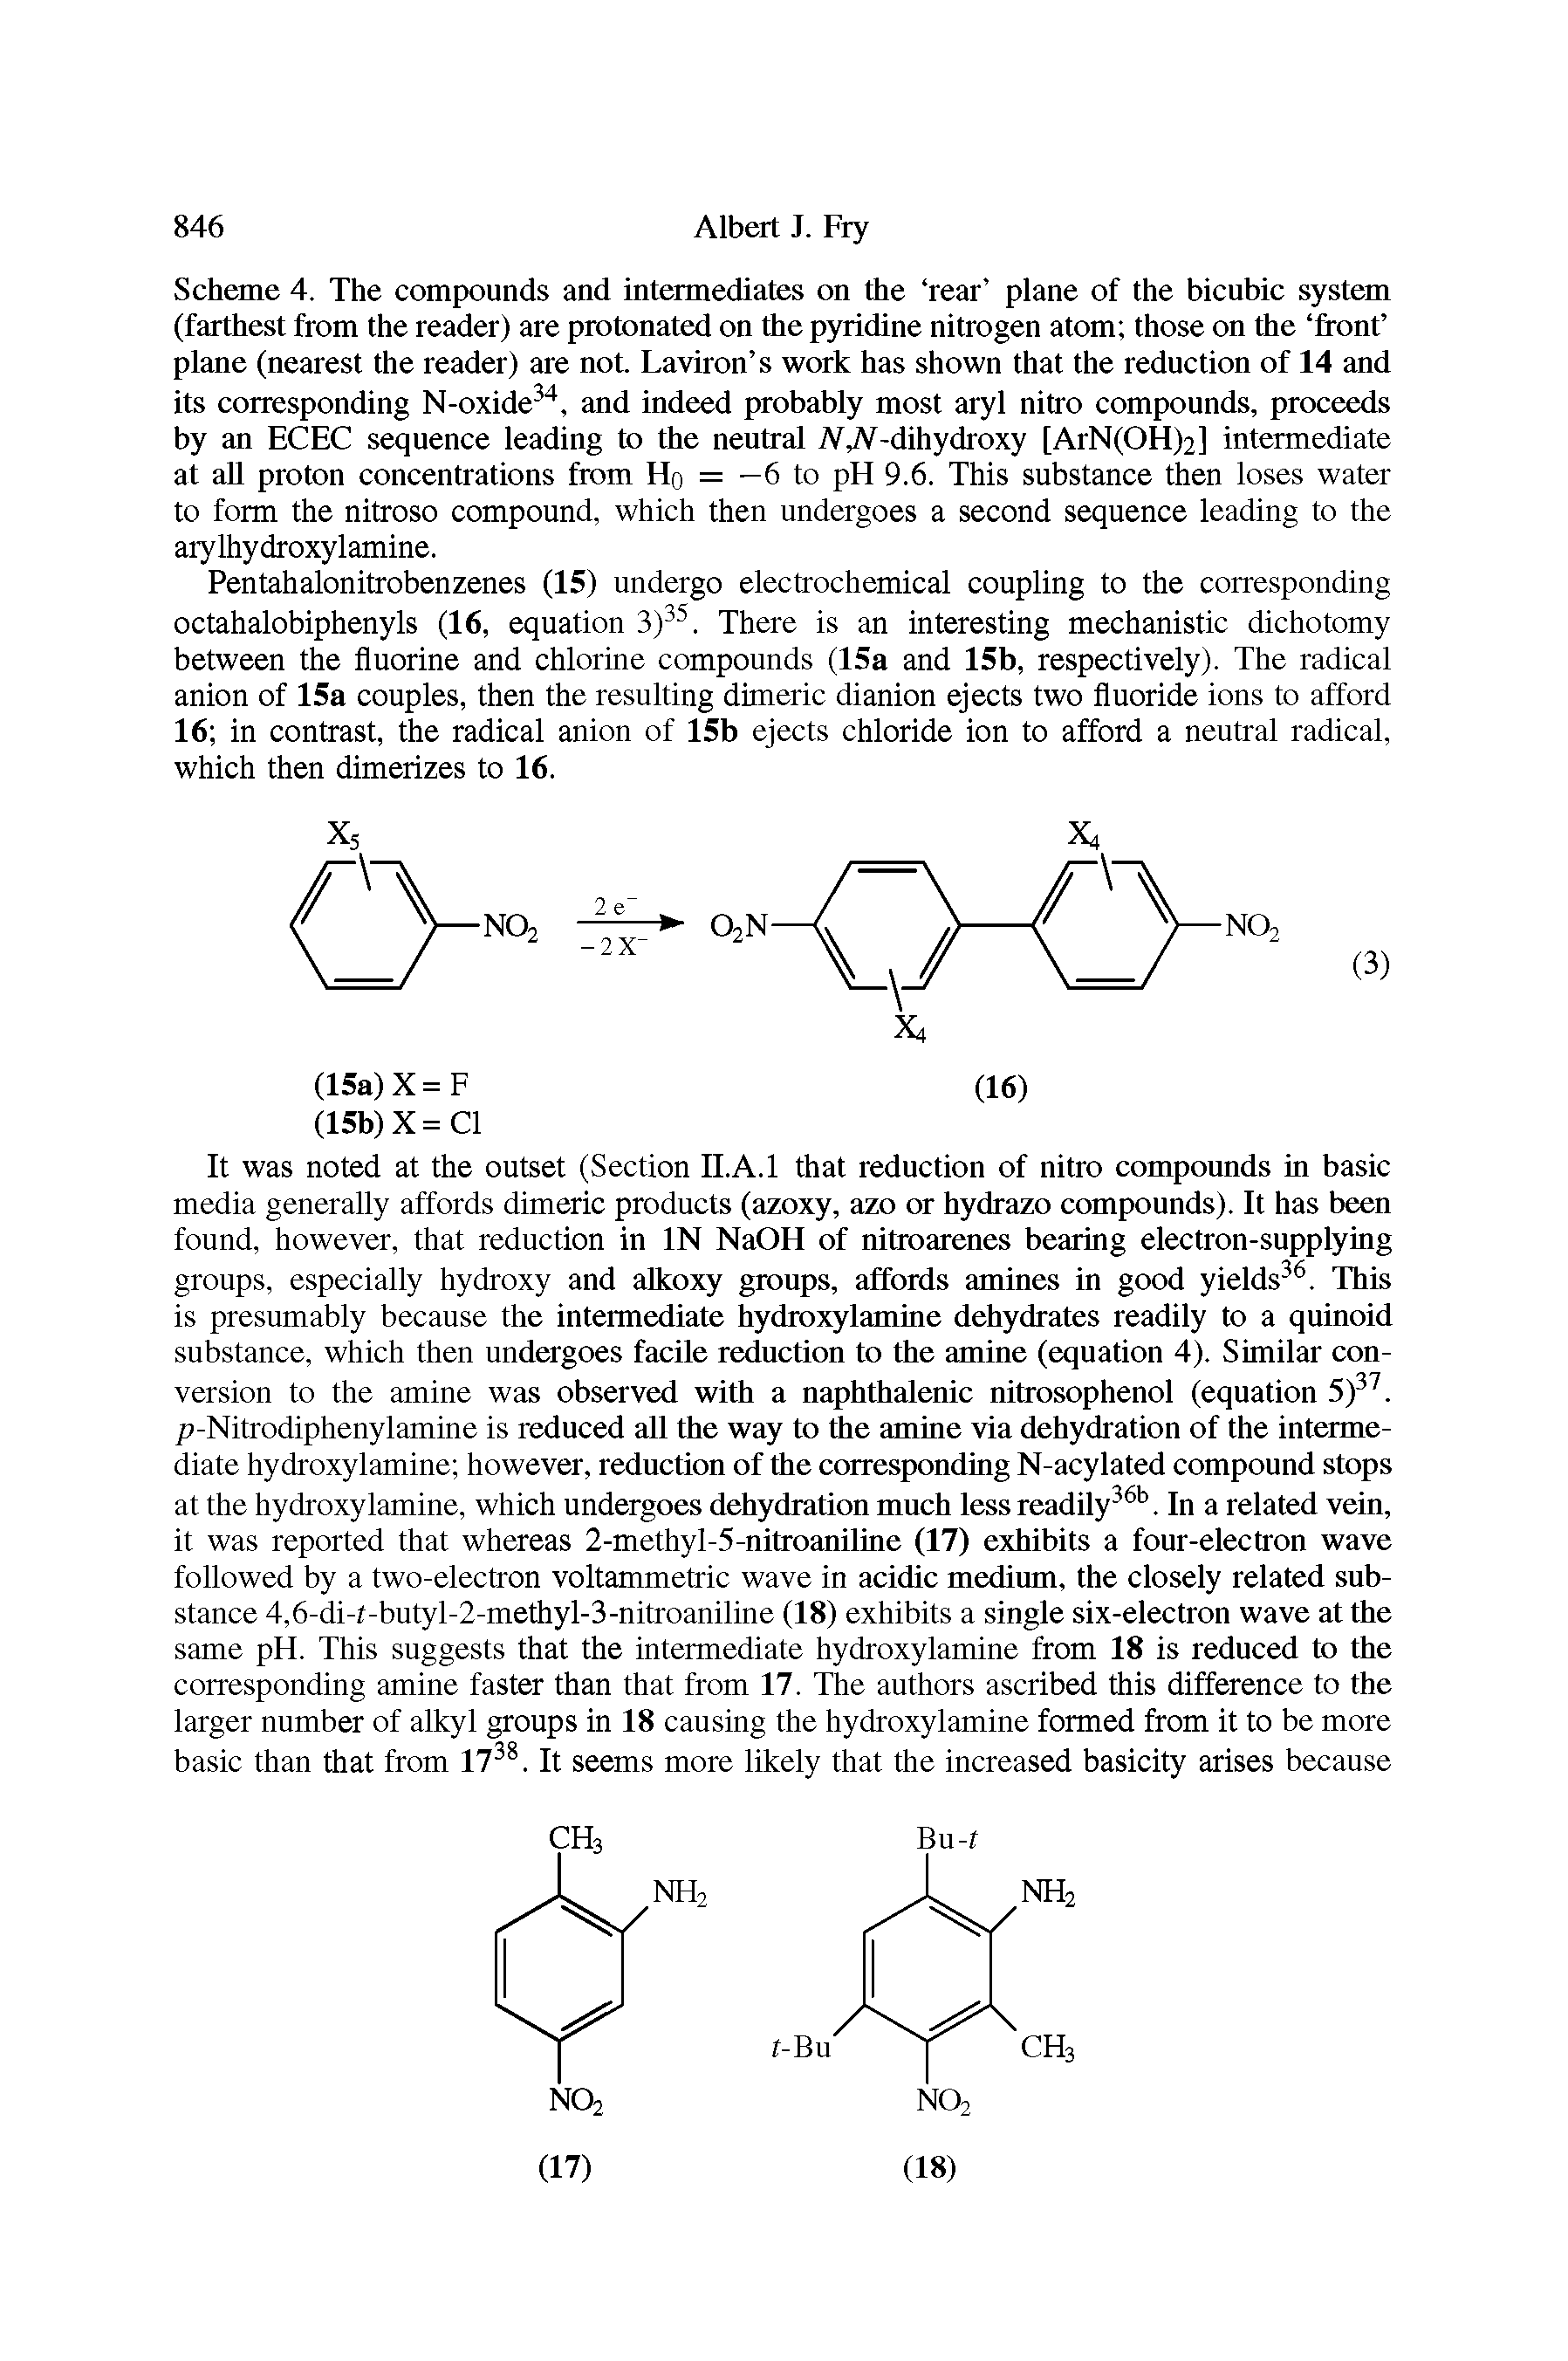 Scheme 4. The compounds and intermediates on the rear plane of the bicubic system (farthest from the reader) are protonated on the pyridine nitrogen atom those on the front plane (nearest the reader) are not. Laviron s work has shown that the reduction of 14 and its corresponding N-oxide34, and indeed probably most aryl nitro compounds, proceeds by an ECEC sequence leading to the neutral N,N-dihydroxy [ArN(OH)2] intermediate at all proton concentrations from Ho = —6 to pH 9.6. This substance then loses water to form the nitroso compound, which then undergoes a second sequence leading to the arylhydroxylamine.